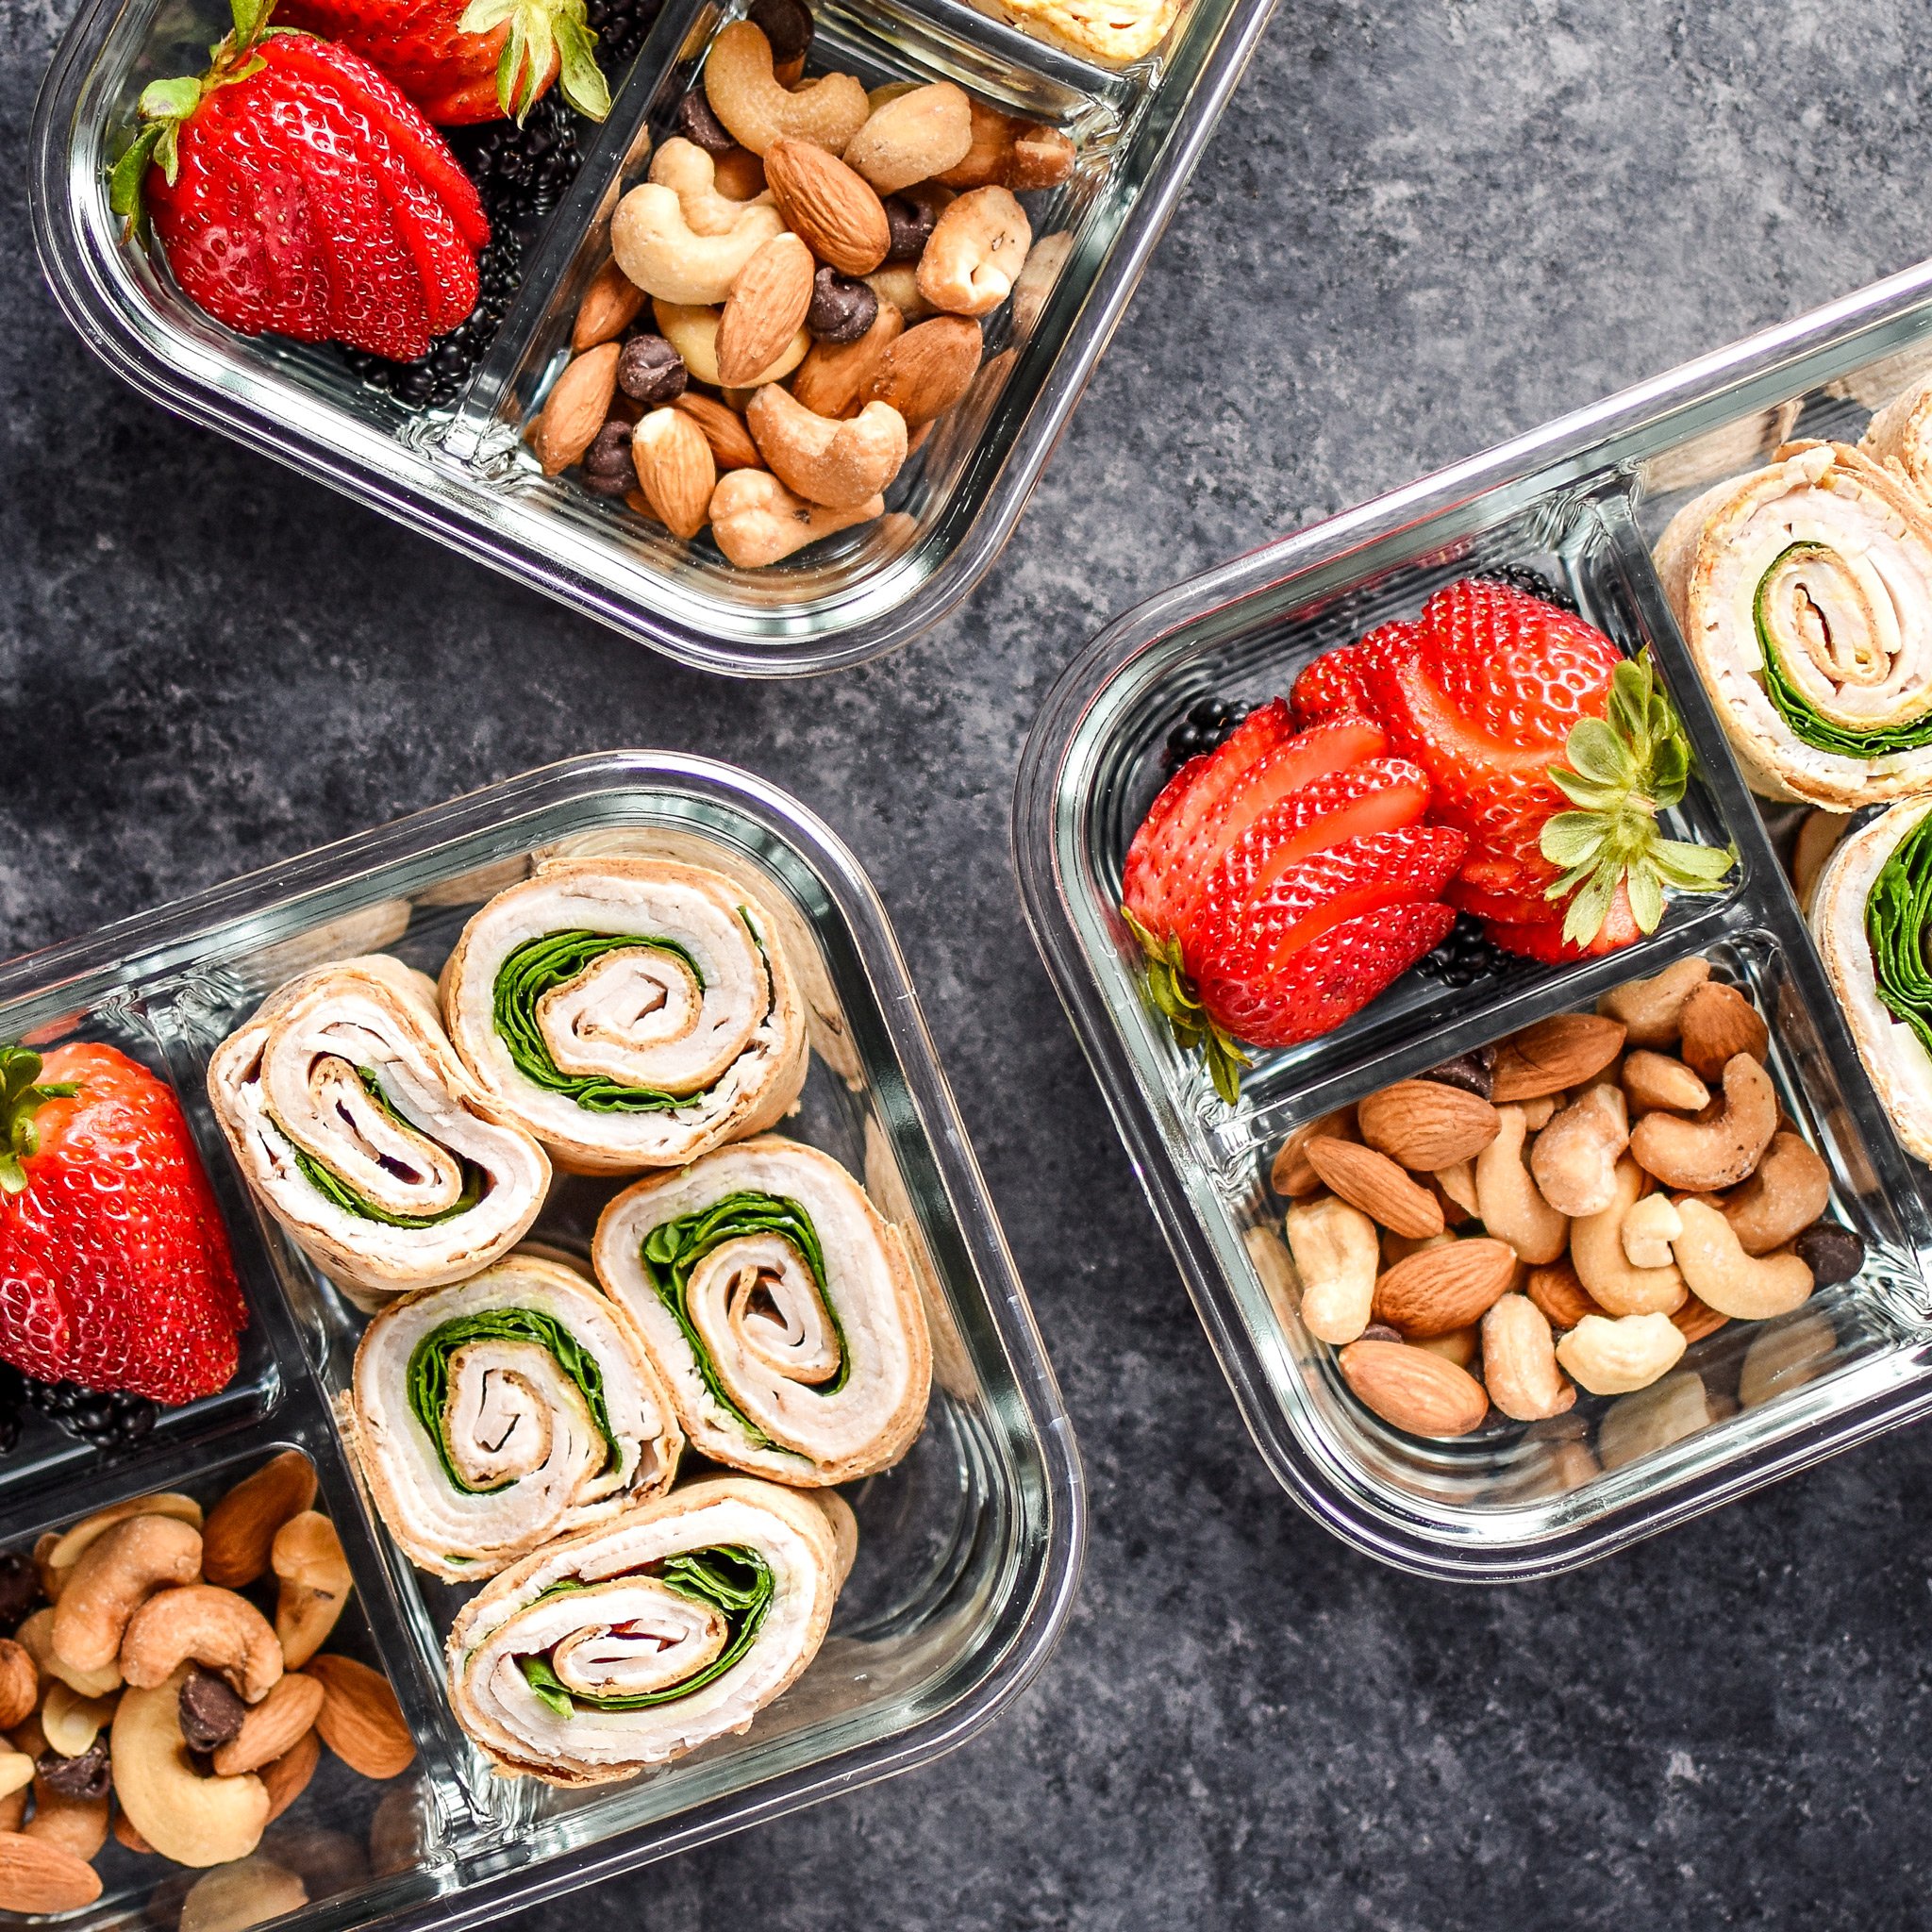 Turkey pinwheels are an excellent no heat lunch option. Served here with nuts and fruit.